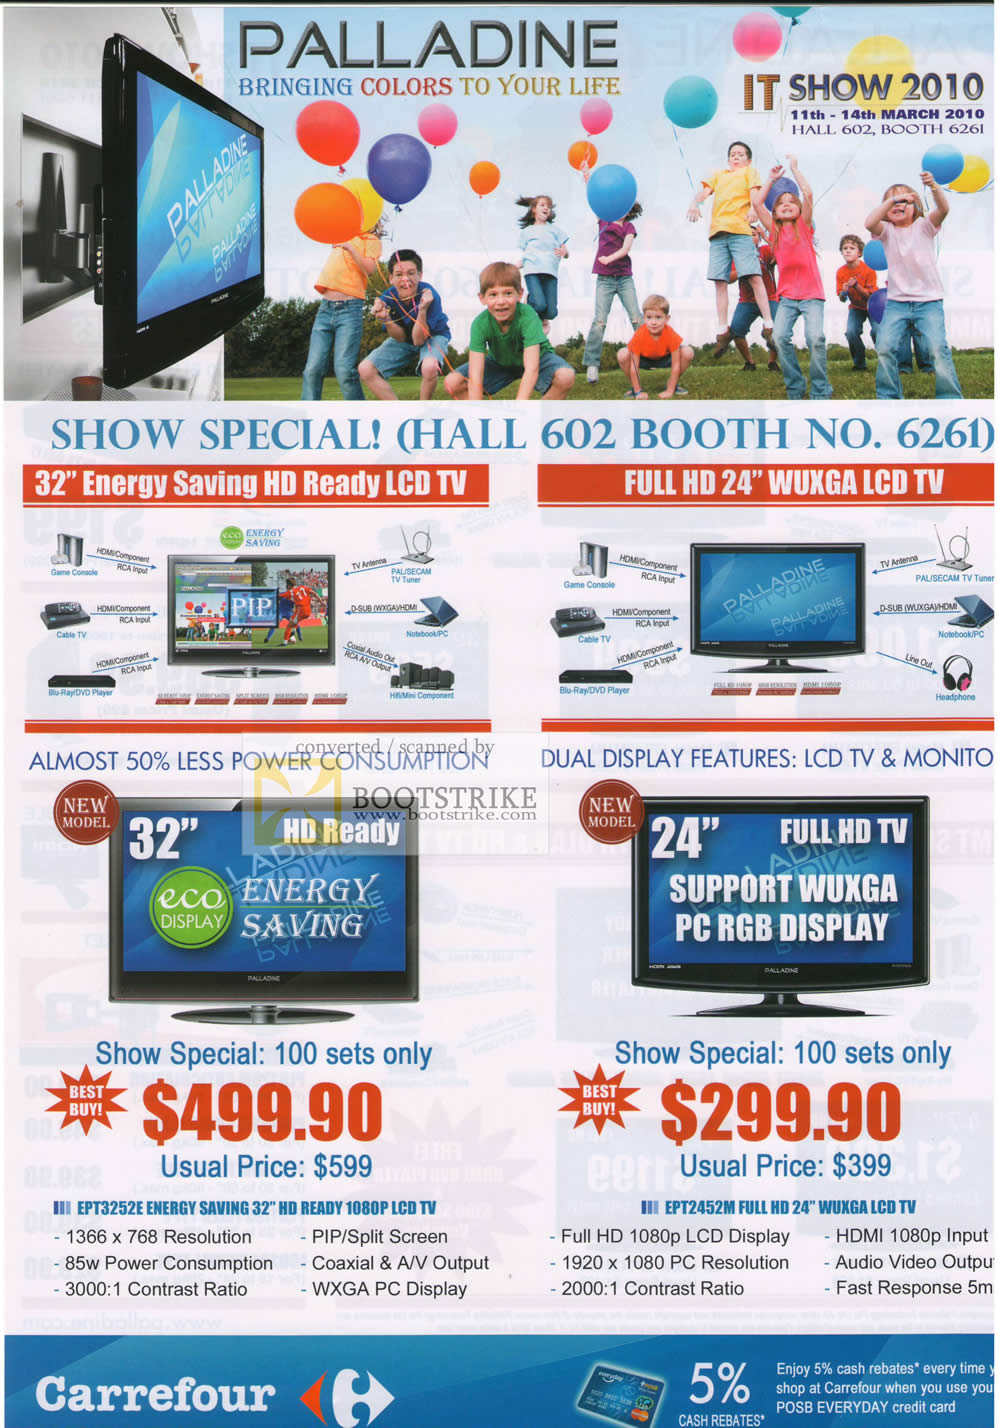 IT Show 2010 price list image brochure of Carrefour Palladine LCD TV EPT3252E EPT2452M